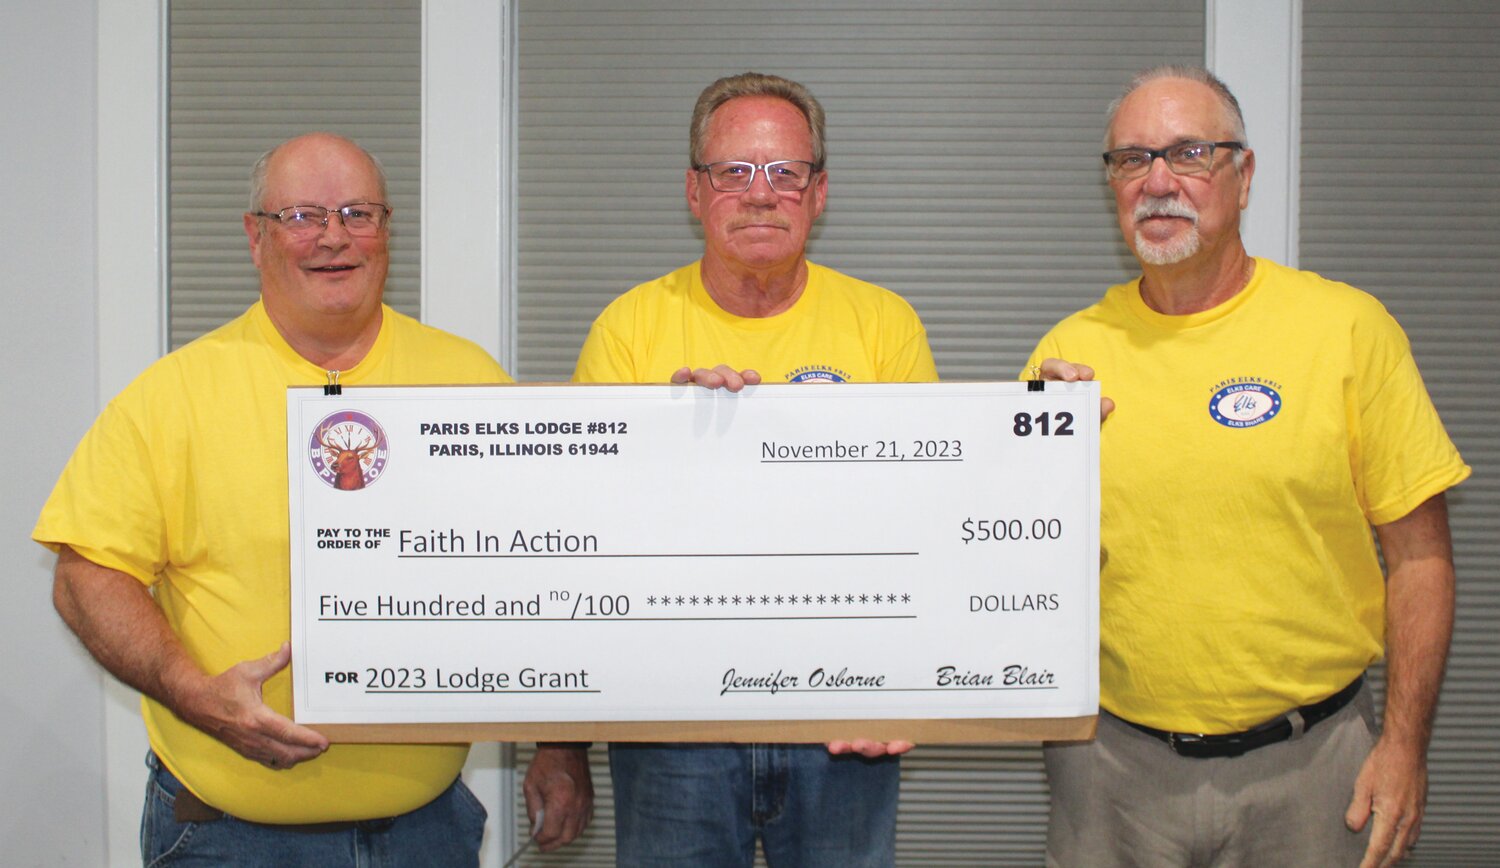 The Paris Elks Lodge #812 donated $500 to Faith in Action. Left to right are Greg Irwin, Ray Korte and Jim Osborne.